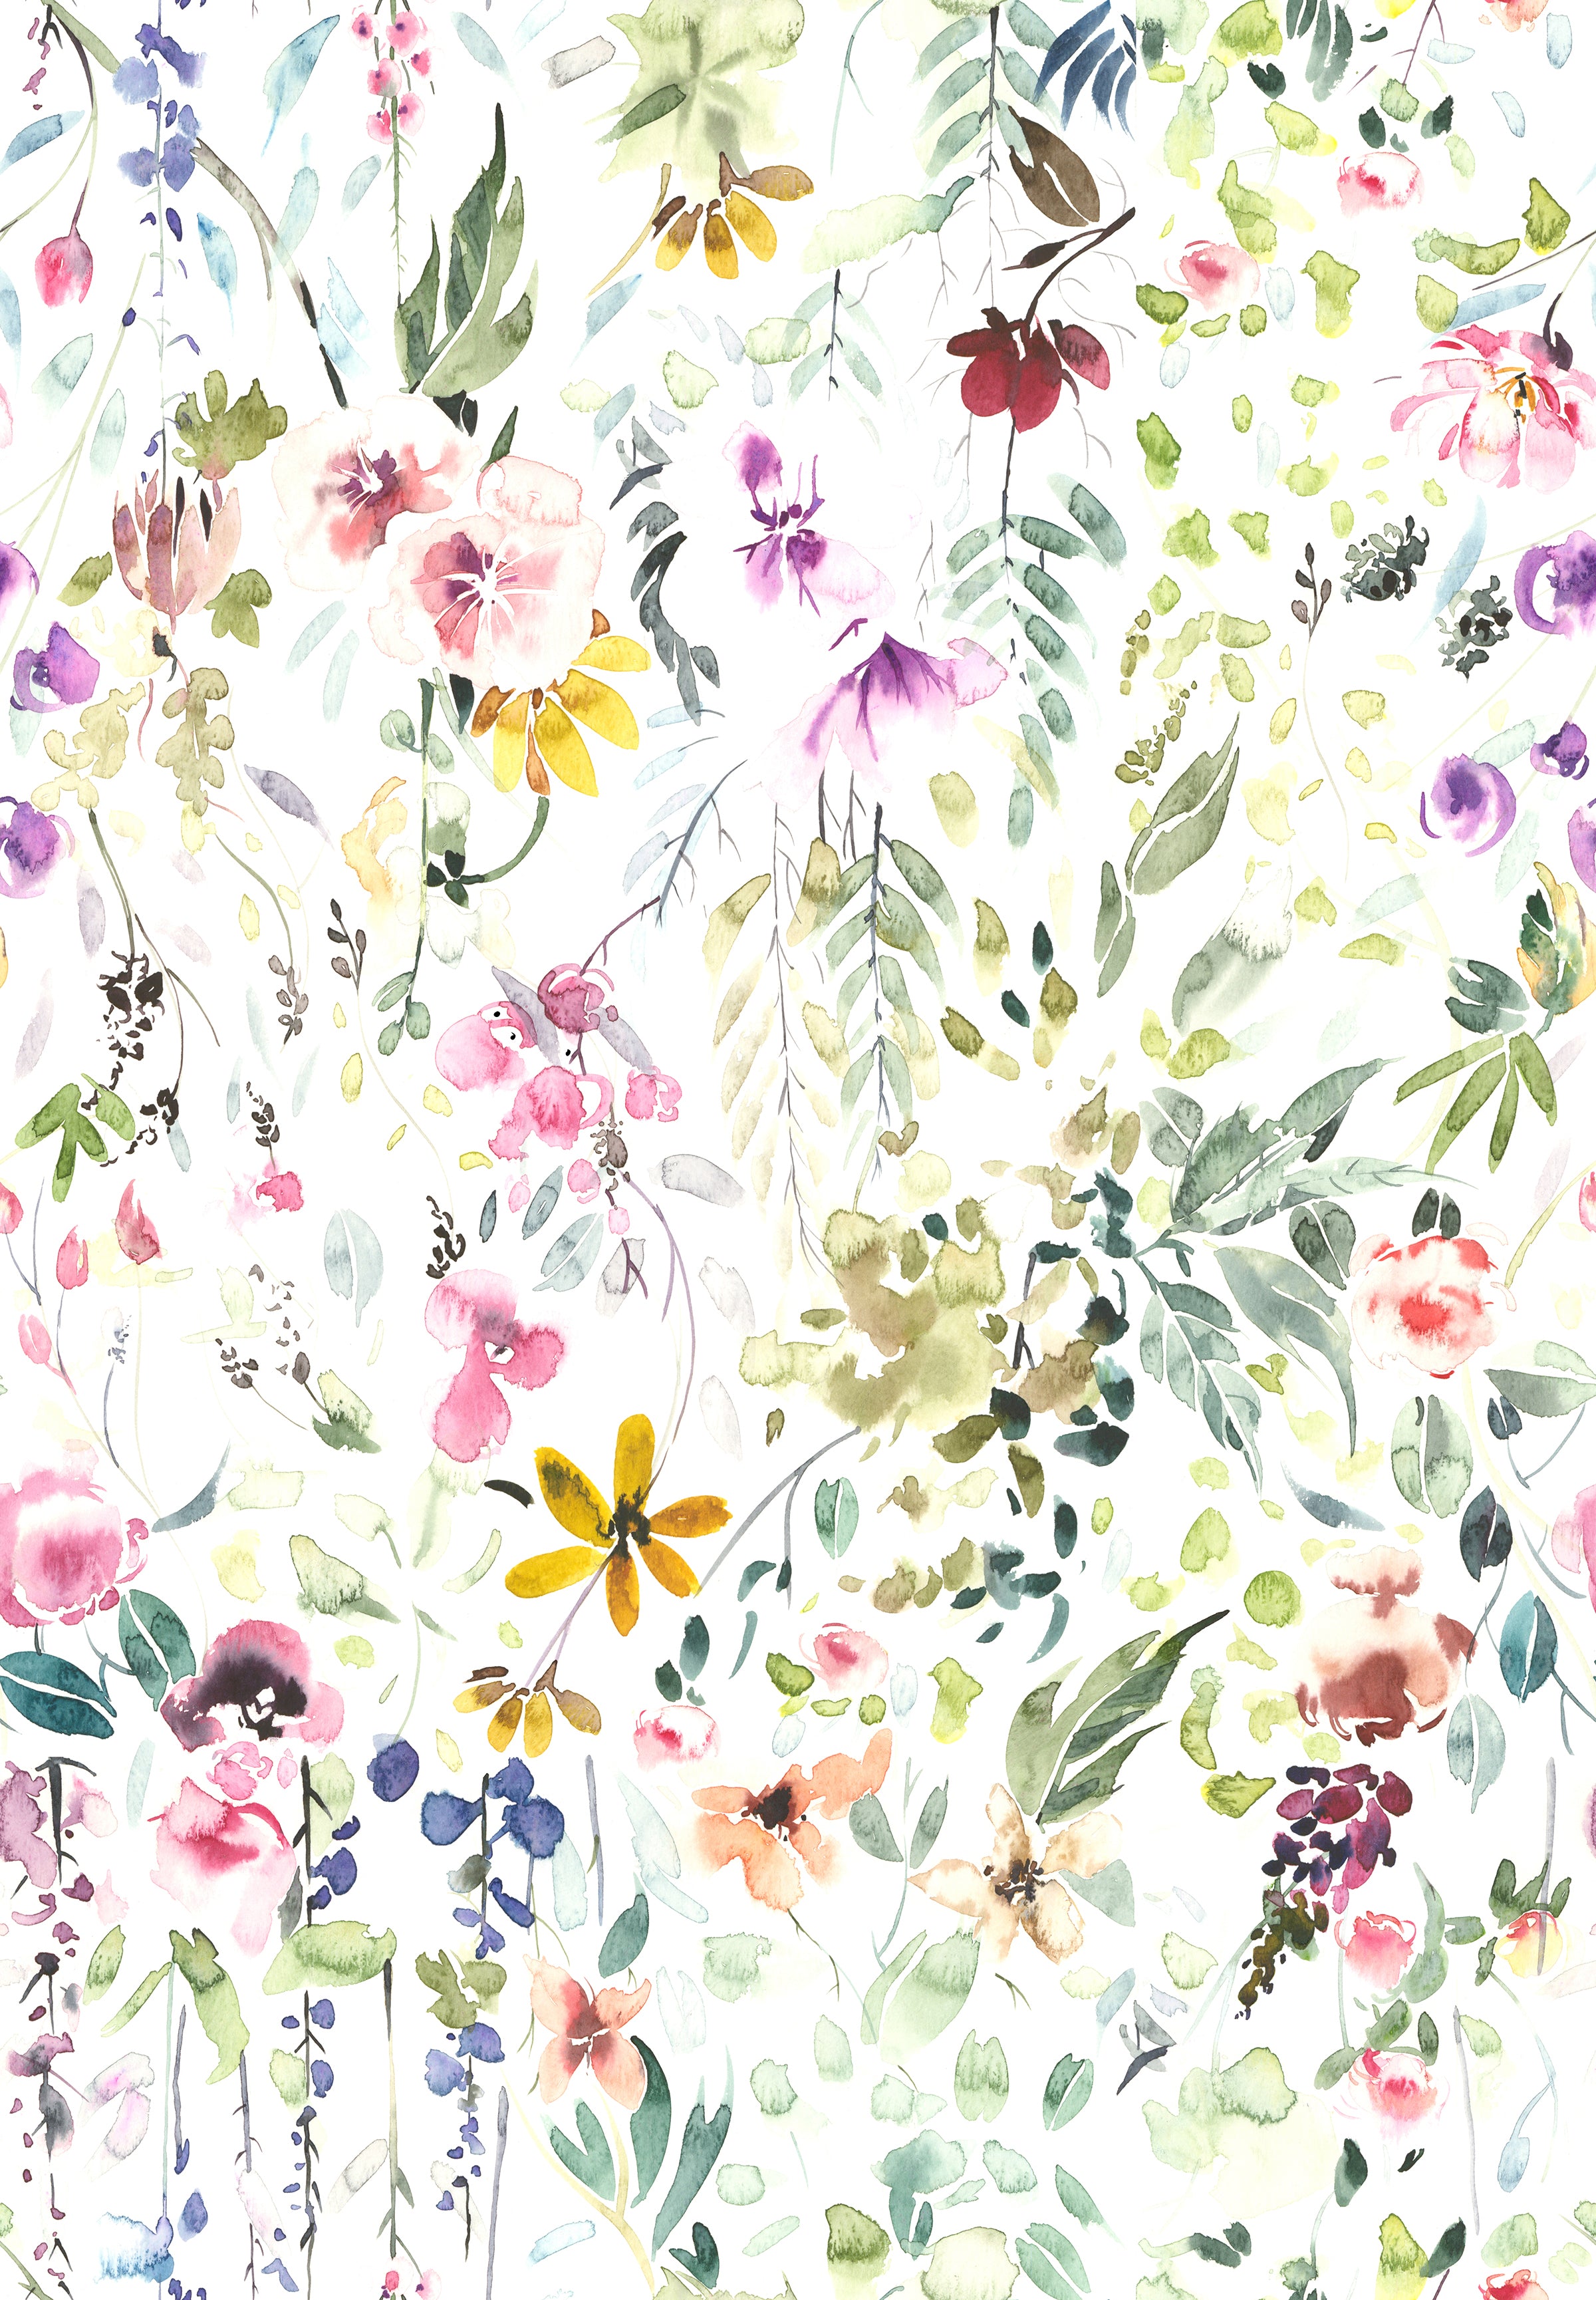 A close-up of Hera's Floral Wallpaper, capturing the exquisite detail and pastel palette of the watercolor flowers, which bring a breath of spring and a touch of nature's serenity indoors